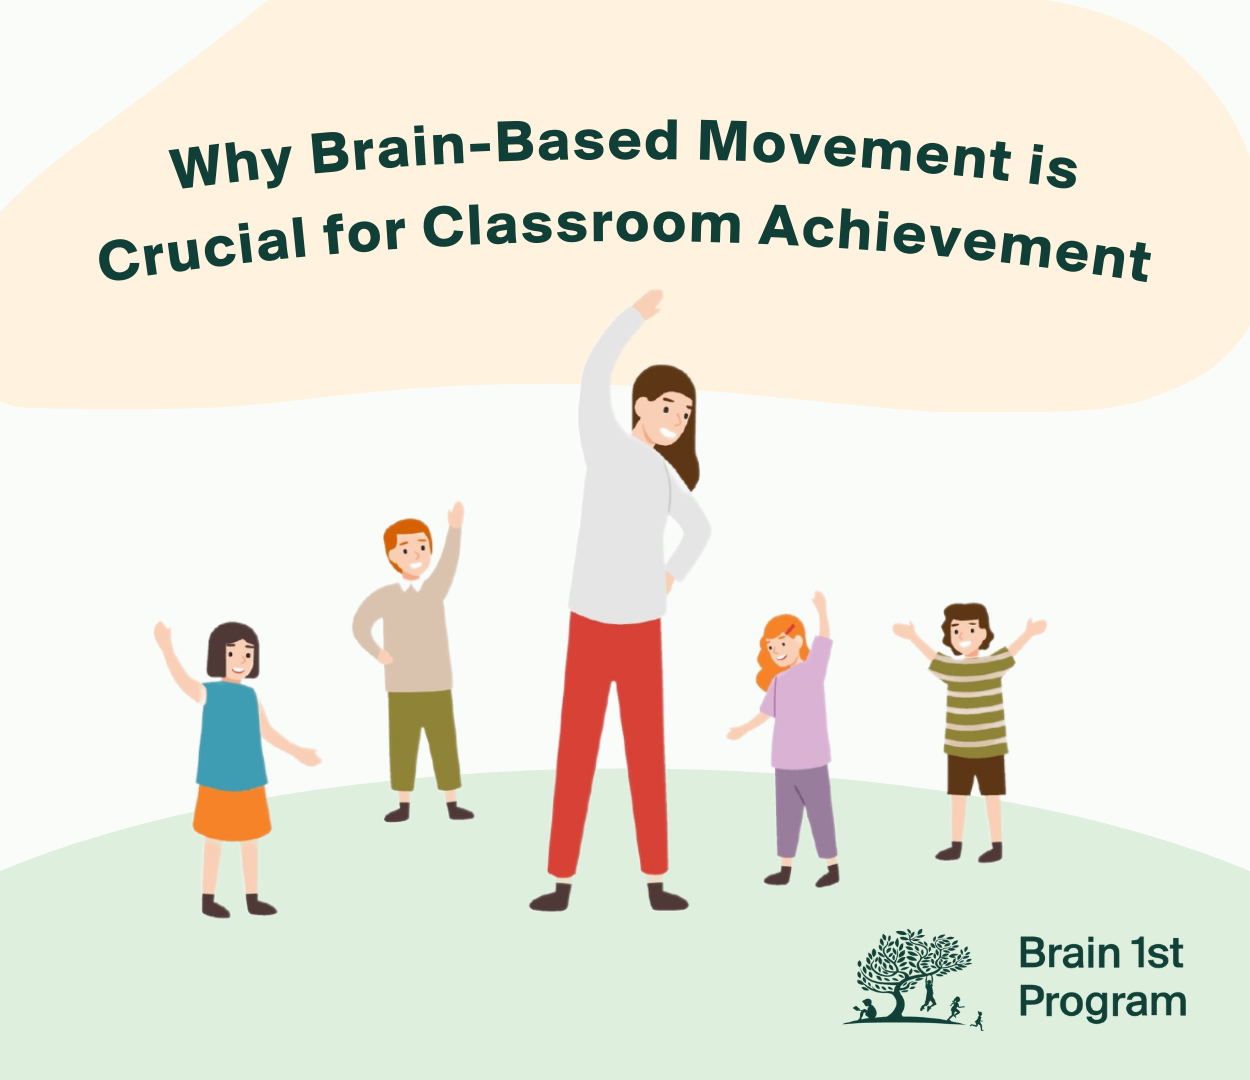 Why Brain-Based Movement is Crucial for Classroom Achievement